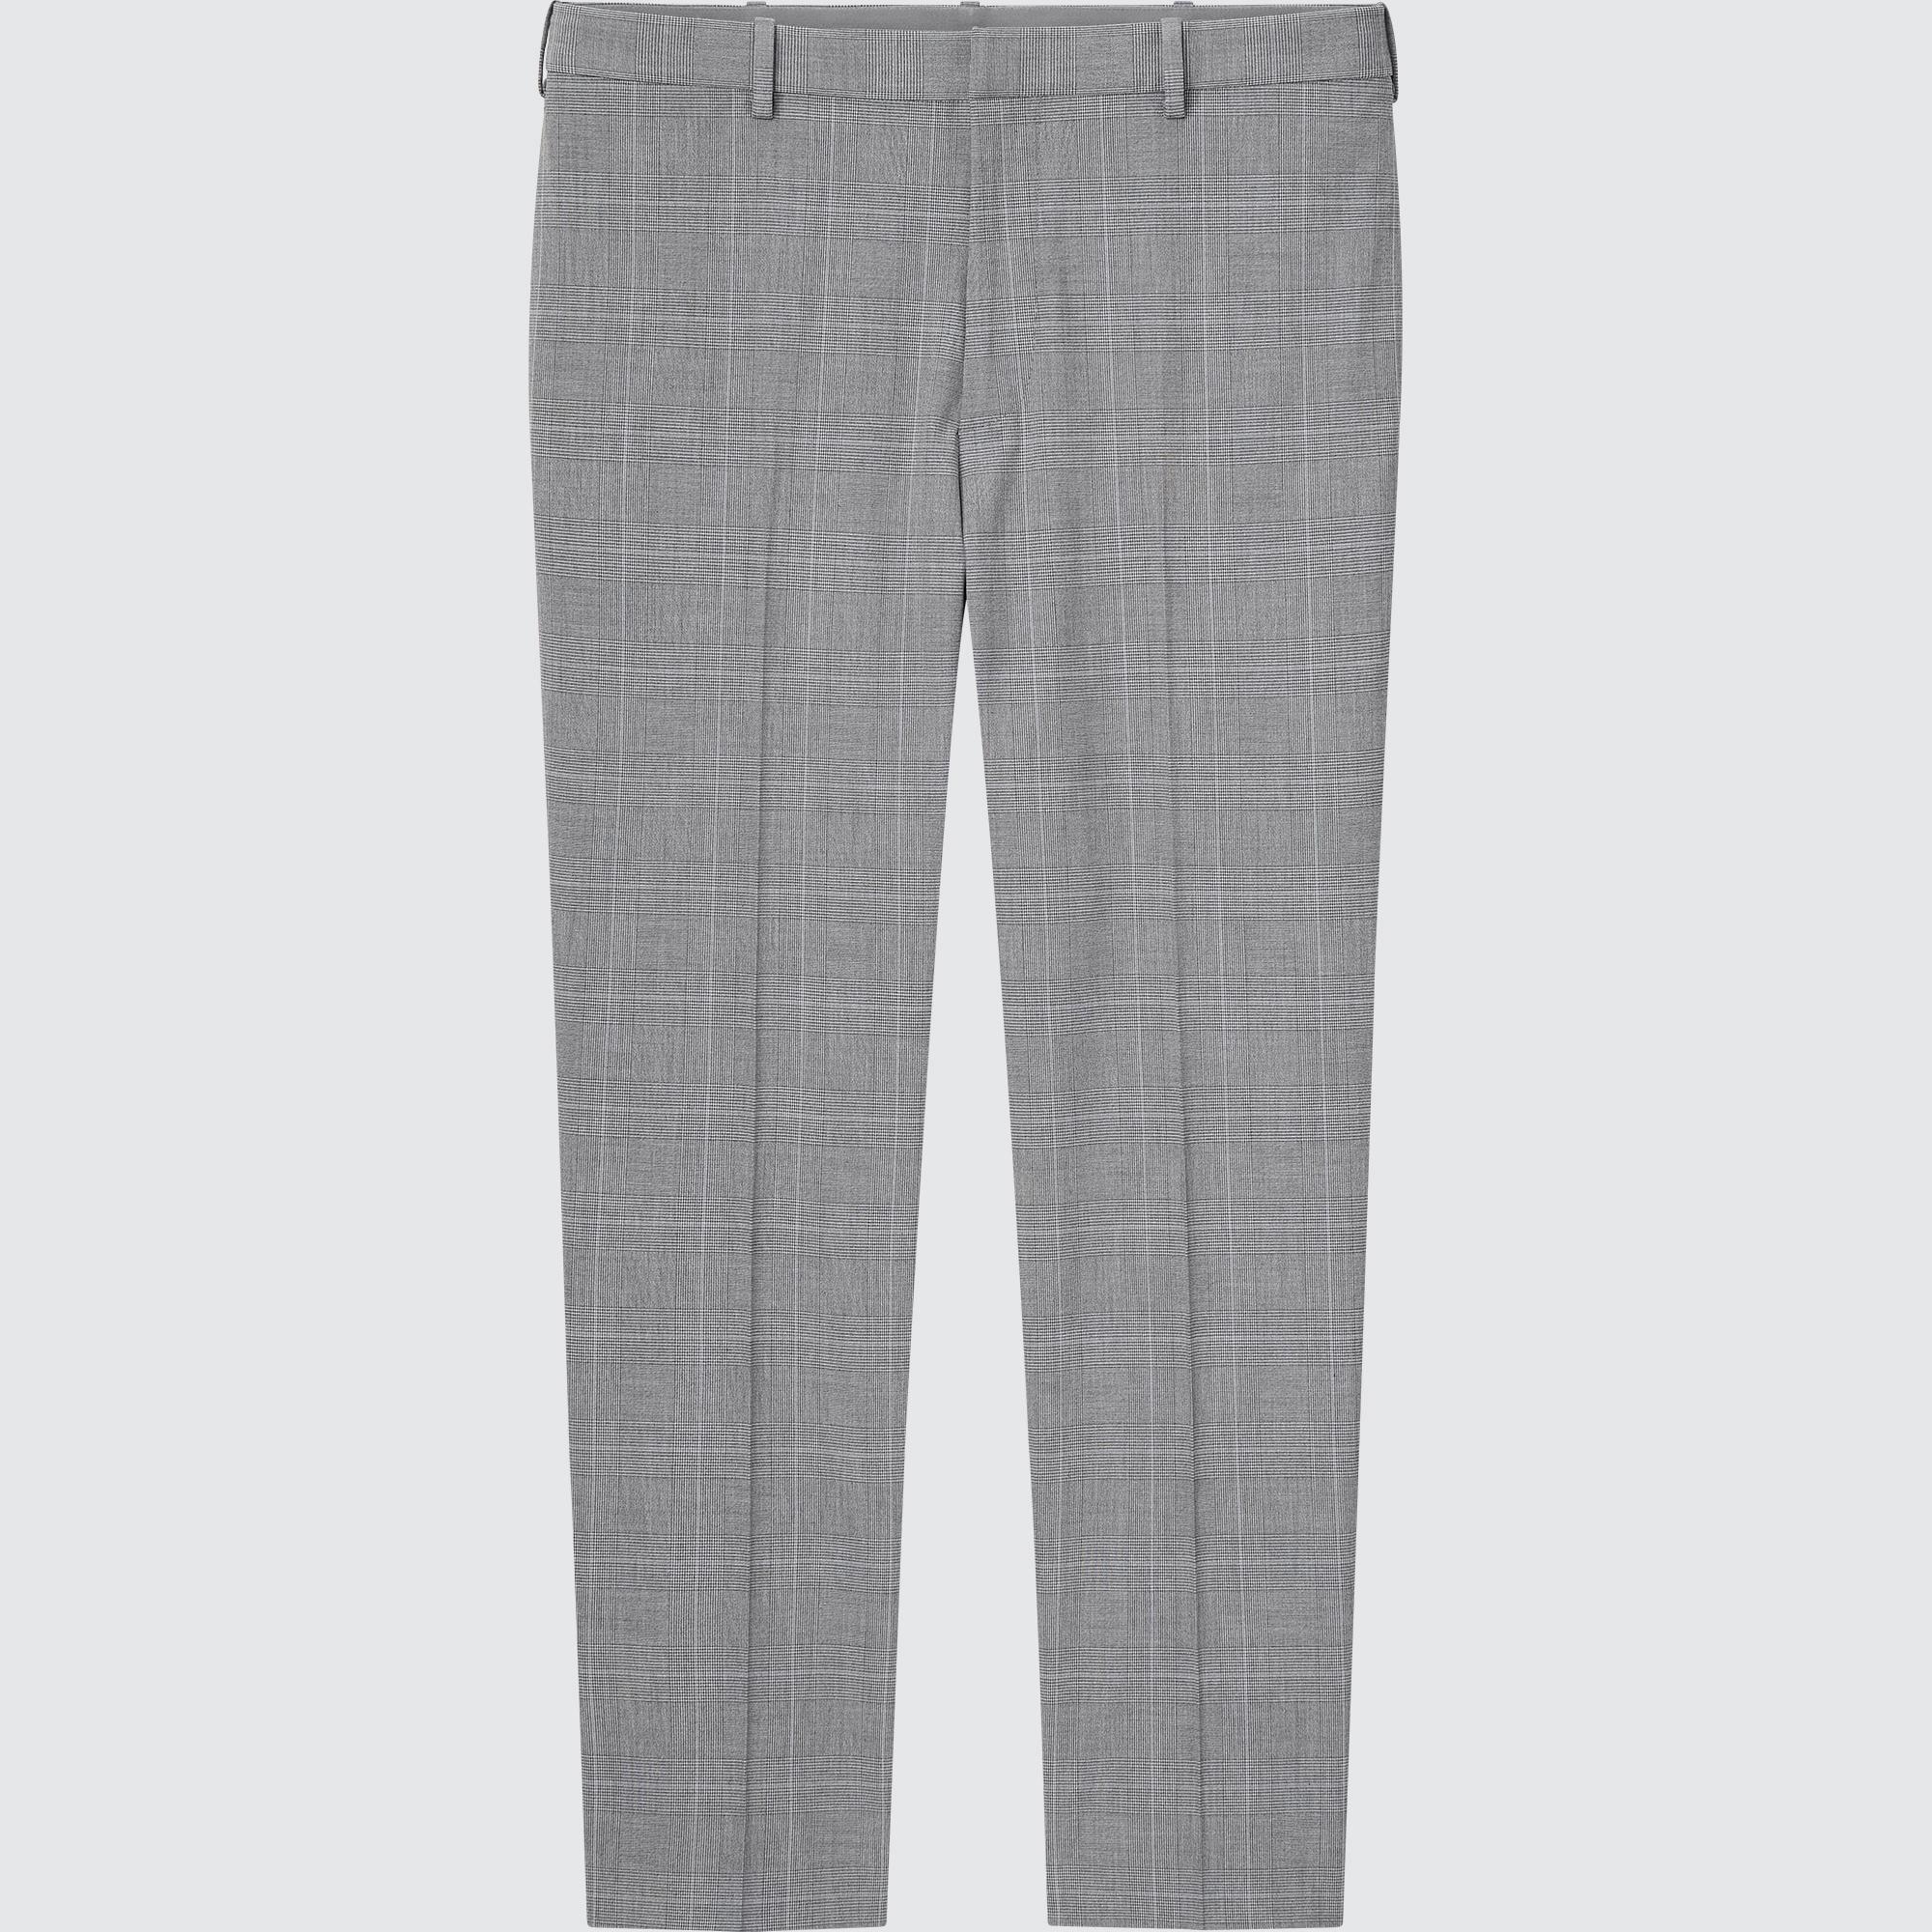 Uniqlo navy checkered pants Womens Fashion Bottoms Other Bottoms on  Carousell